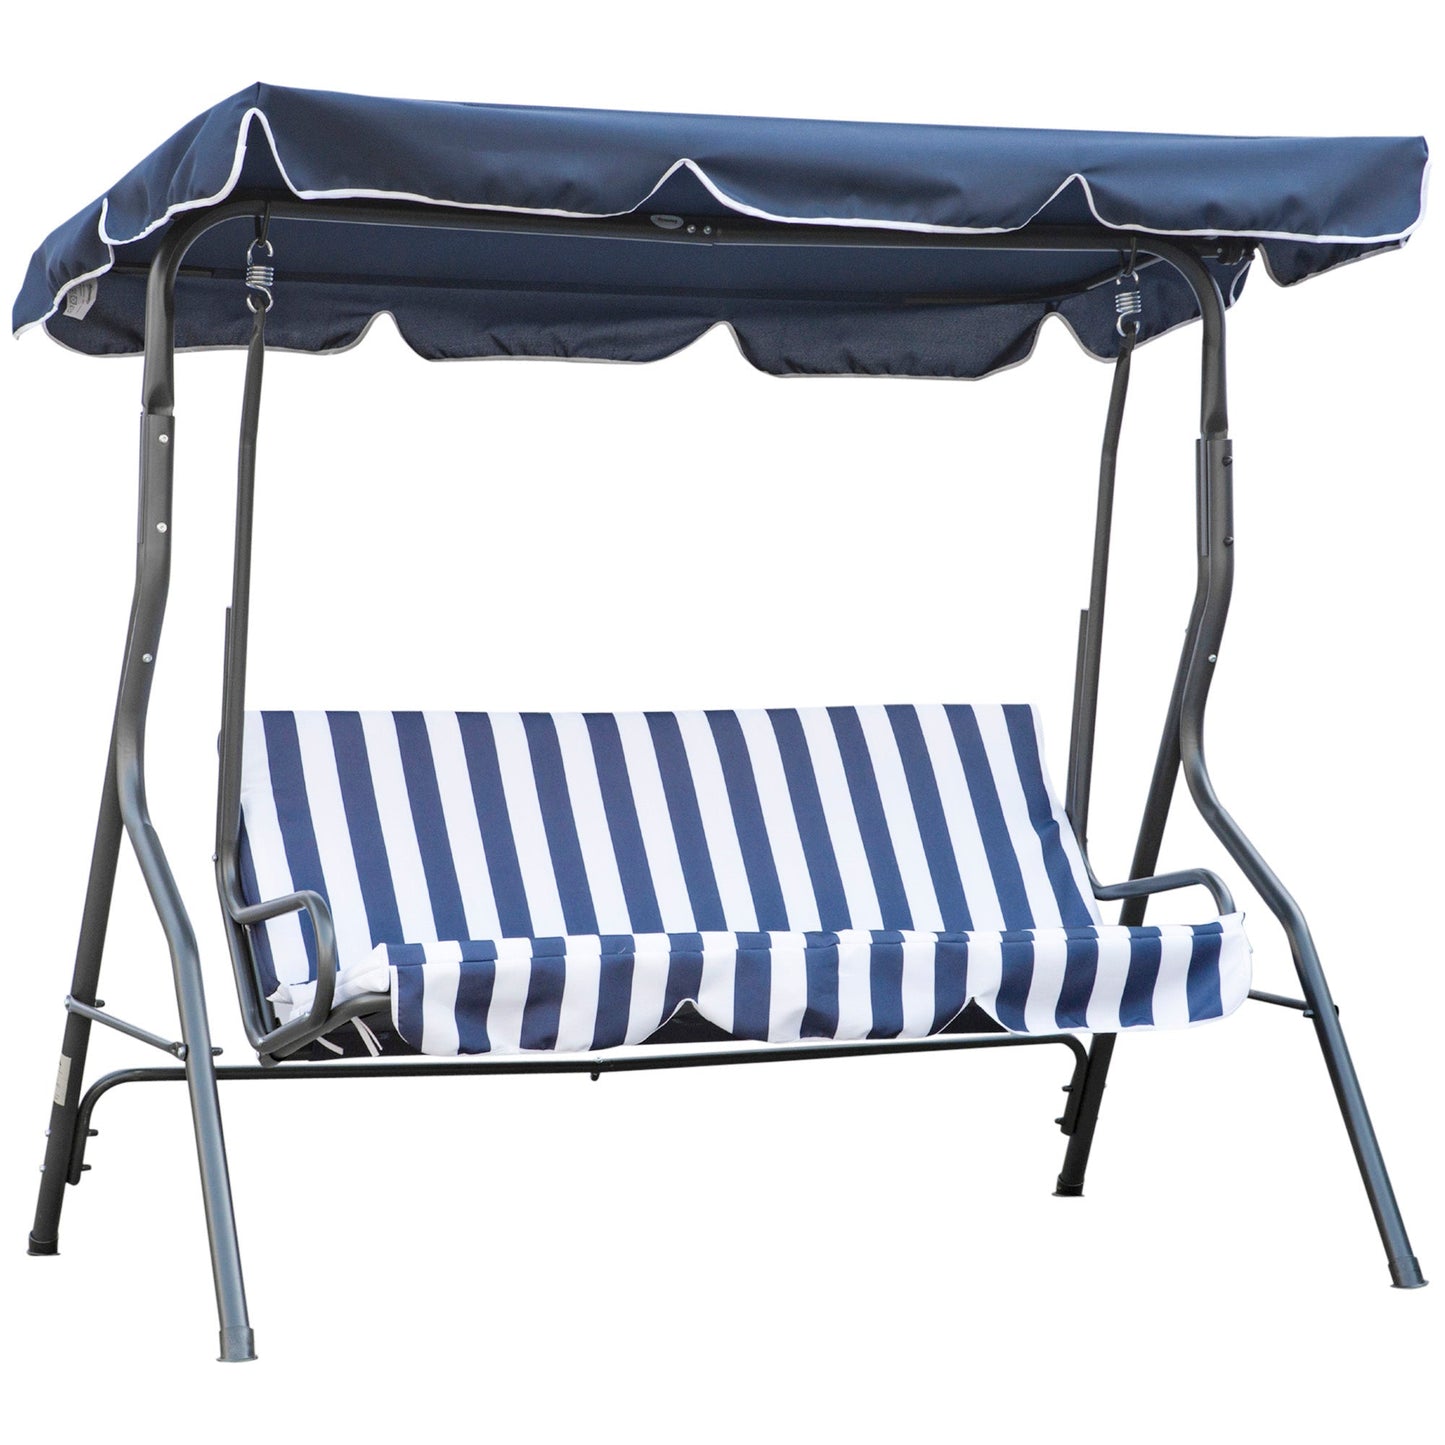 Outdoor and Garden-3-Person Patio Porch Swing with Adjustable Canopy for Adults, Steel Frame, Seat & Backrest Cushion, Armrests, Dark Blue & White Striped - Outdoor Style Company